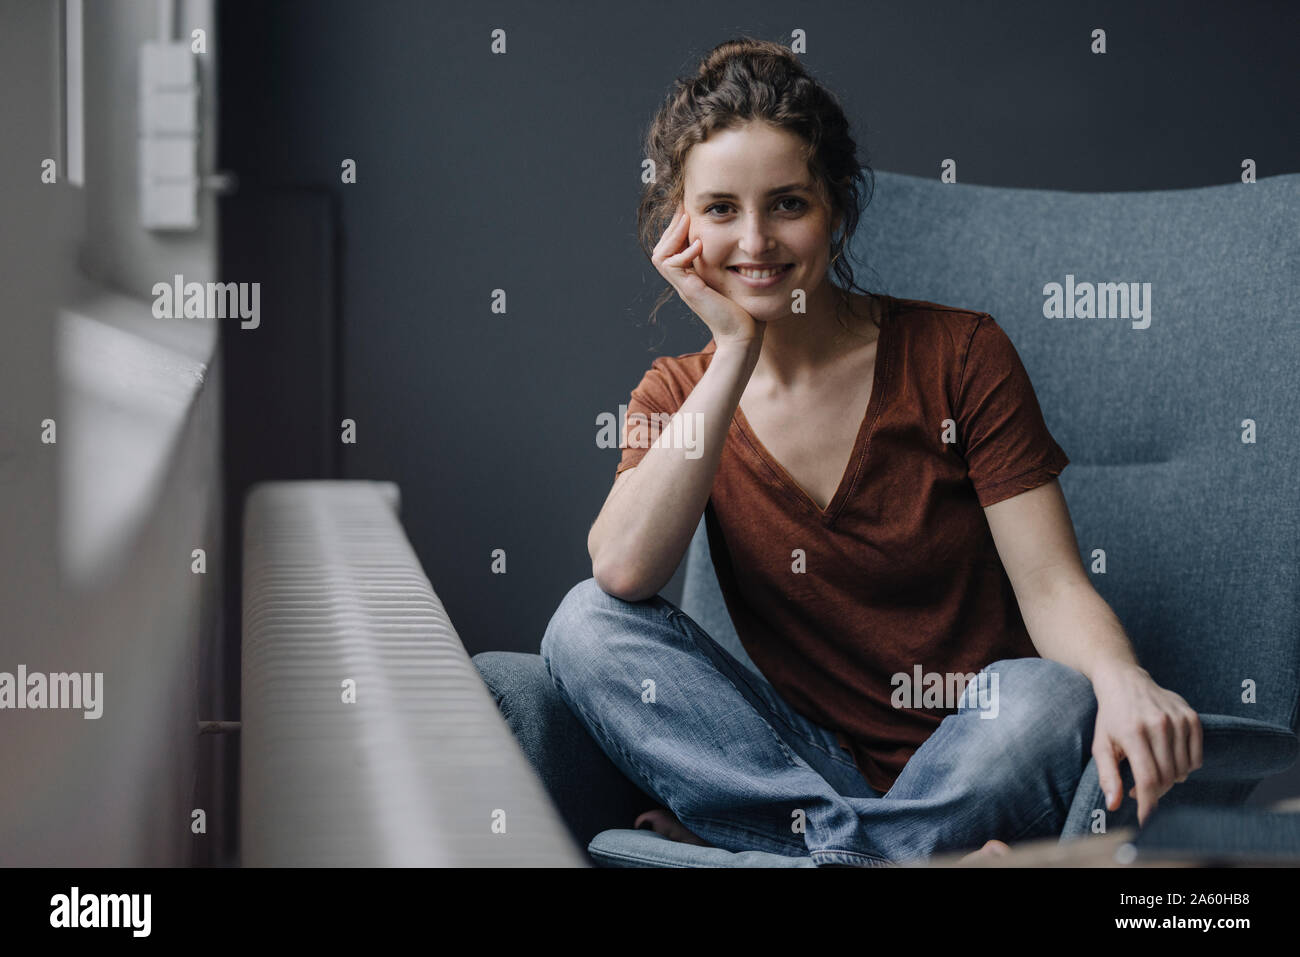 Portrait of smiling young woman sitting on lounge chair at home Banque D'Images